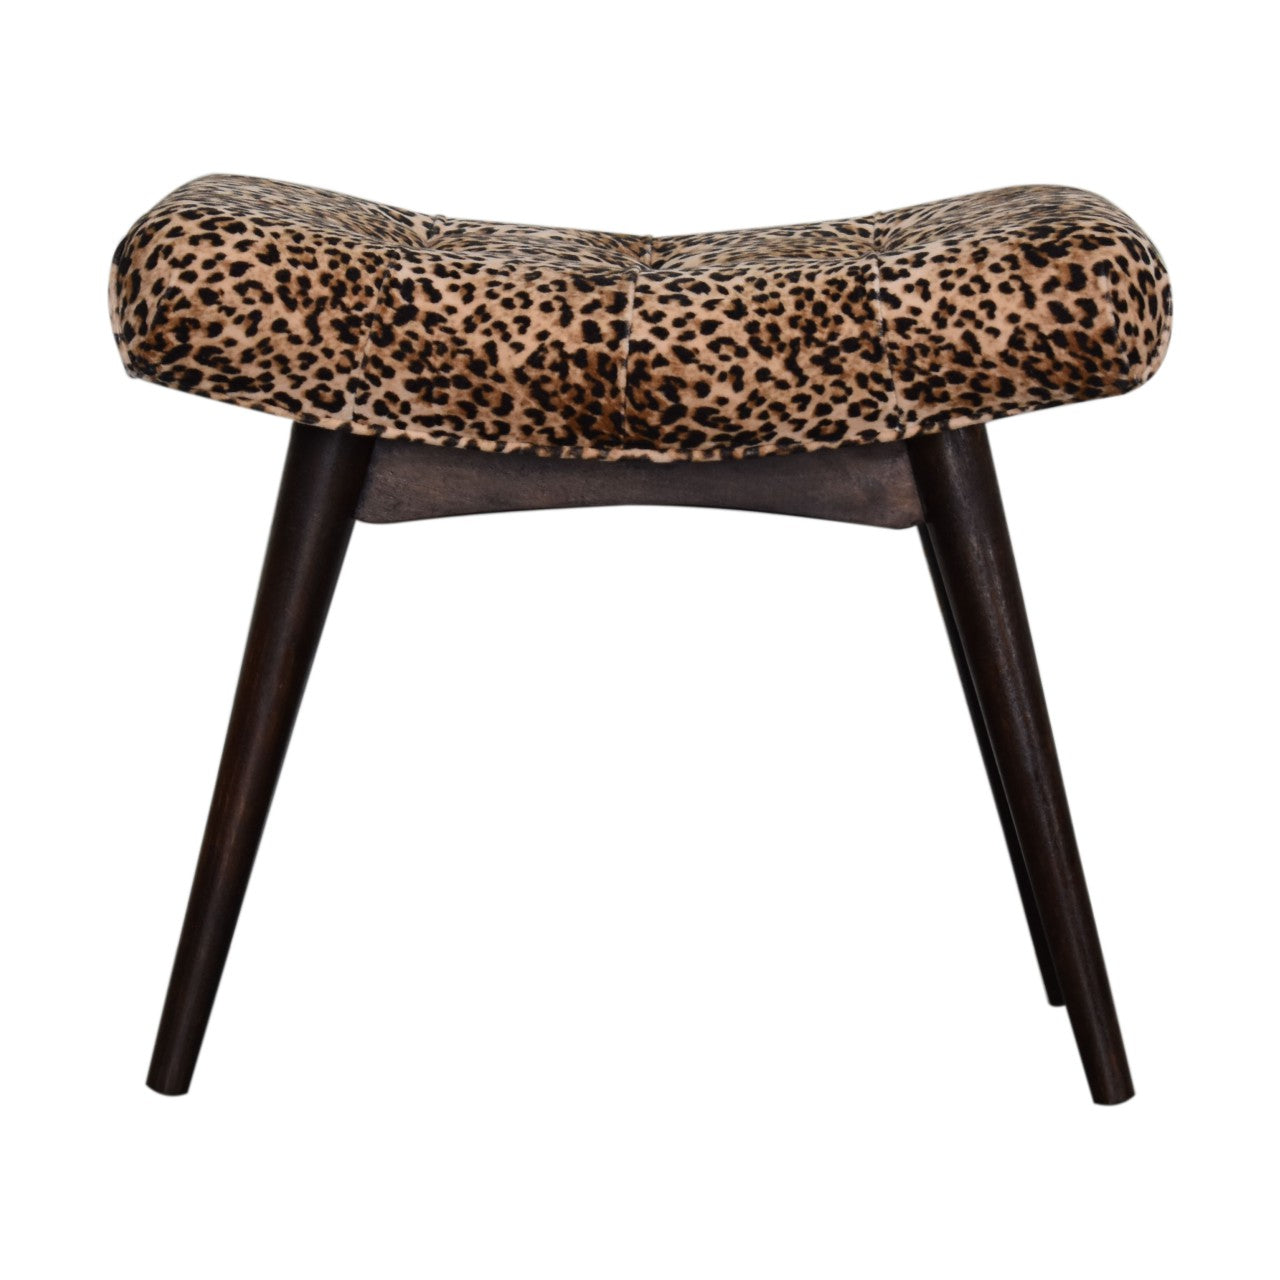 Leopard Print Curved Bench-product